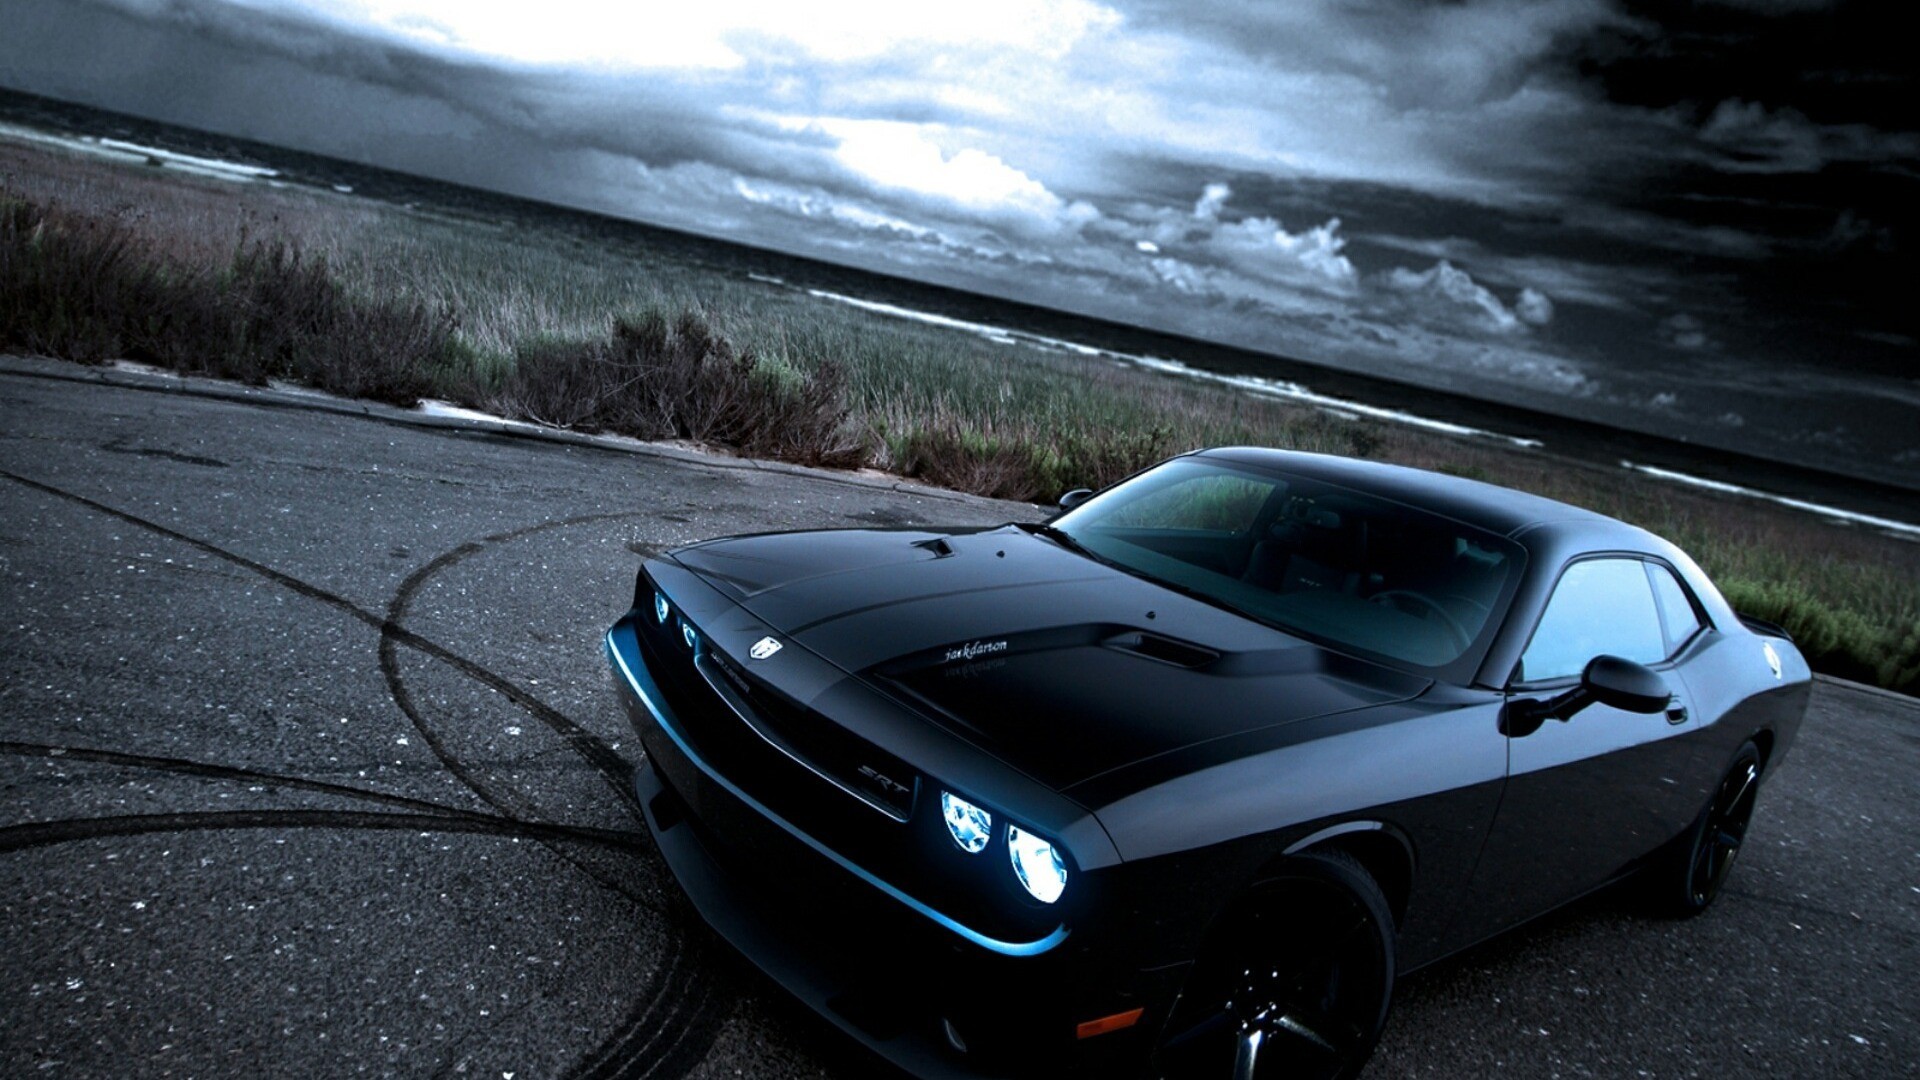 1920x1080 Muscle Car Wallpaper Free Download 51 with Muscle Car Wallpaper Free  Download